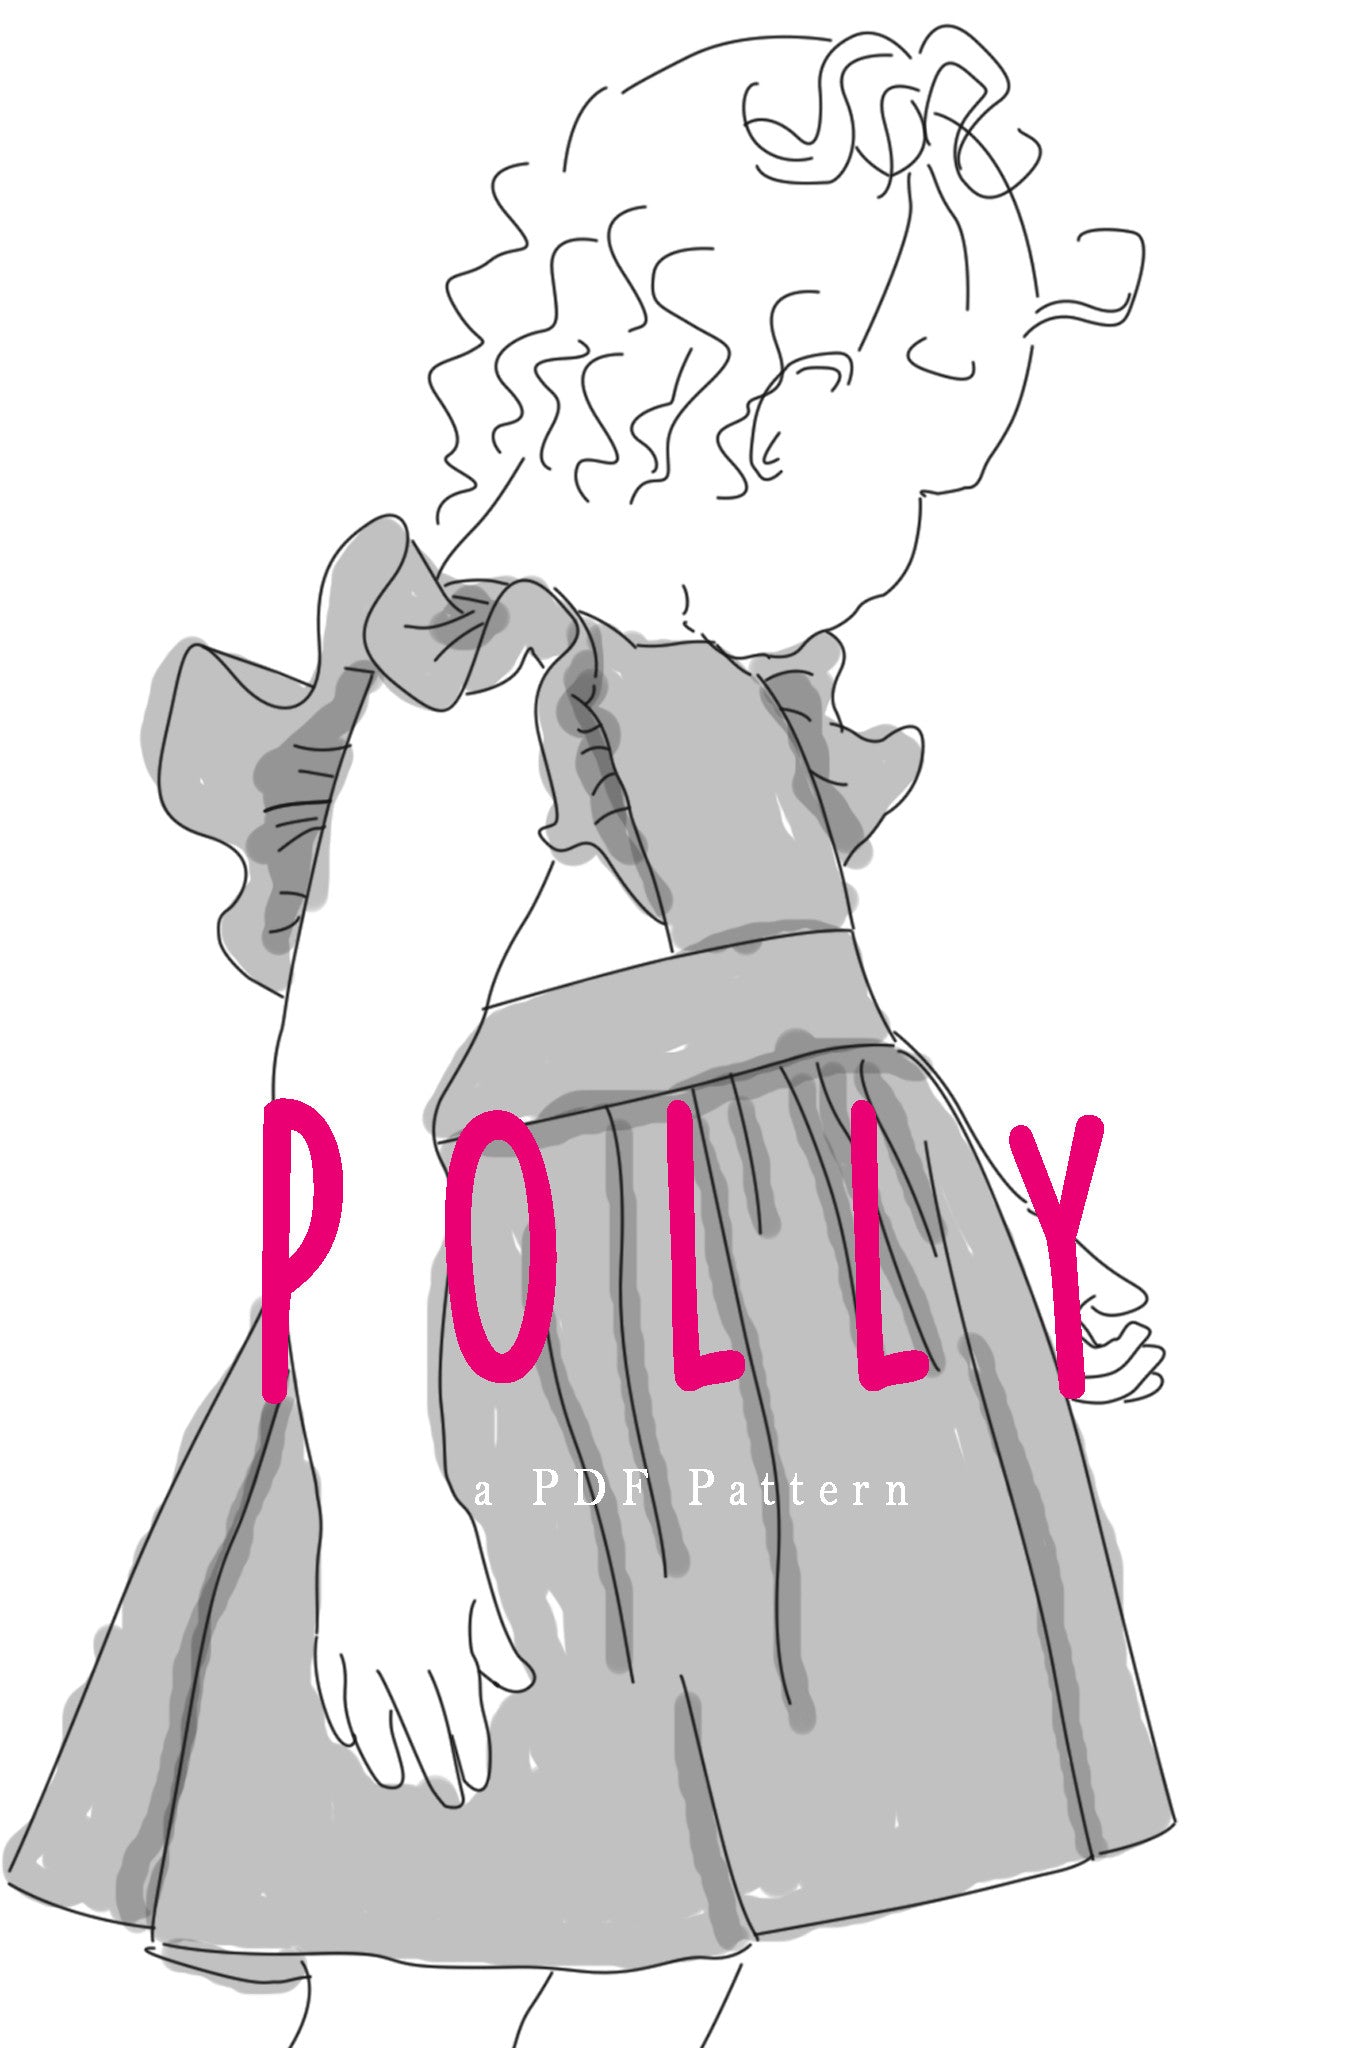 Polly Pinafore - Tester Round up